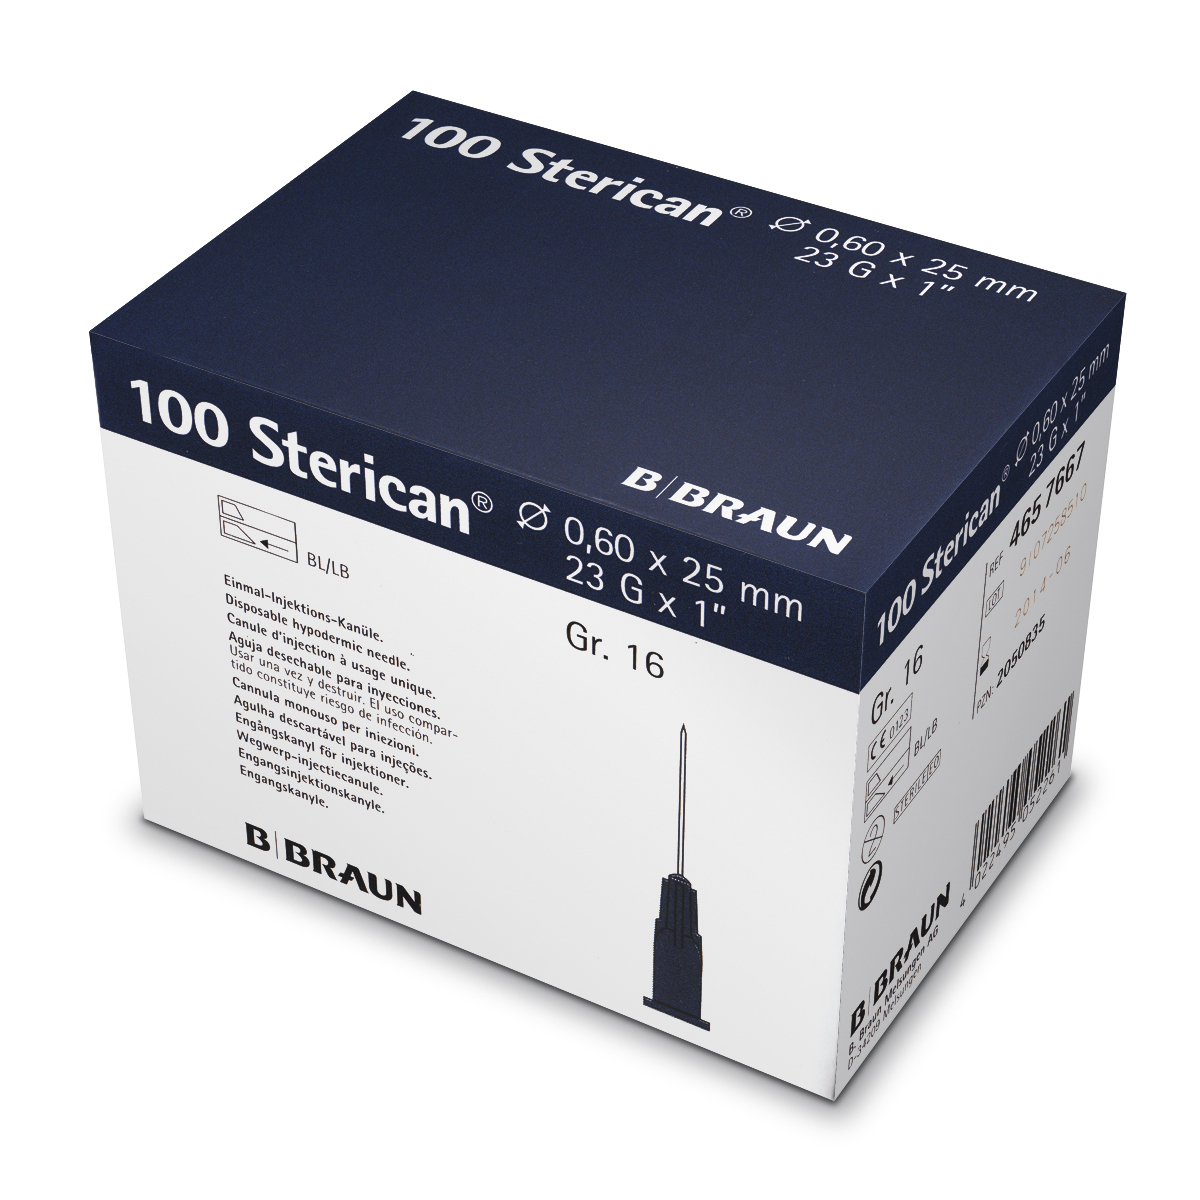 Sterican Hypodermic Needle 23g x 1